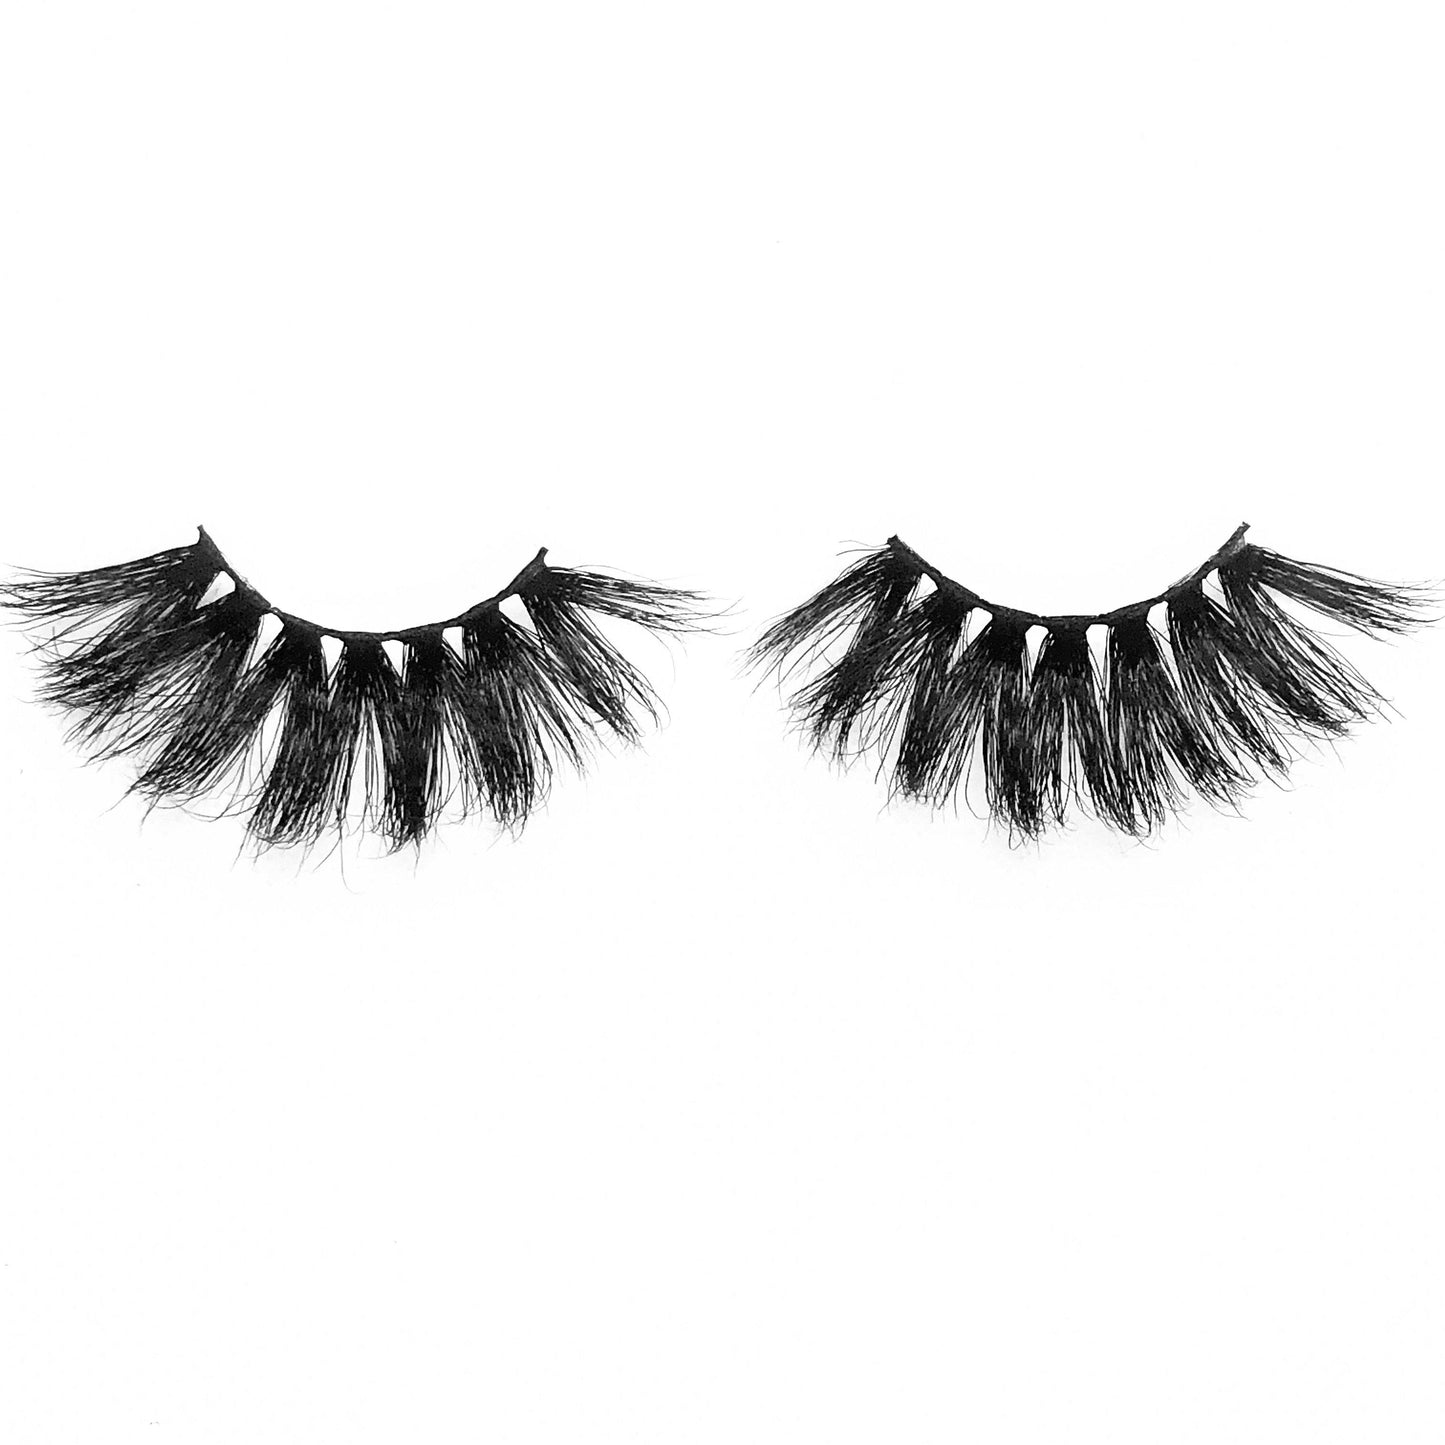 Pretty Gal (3-Pack)-Mega Volume-This set includes (3) 25mm mink lashes: Admire Babydoll Conceited Description Handmade, Cruelty-Free, Wear up to 30x Material: 100% Mink Band: Black Cotton Band Volume:Mega Volume Style: Extra Long, Dramatic, Open-eye, Cat-eye, Wispy To Use: Measure and size your lashes by placing the false lash against your lash line where your natural lashes start. Using Mini Scissors, cut off the excess lash band length from the outer corners to ensure they fit properly. Apply 